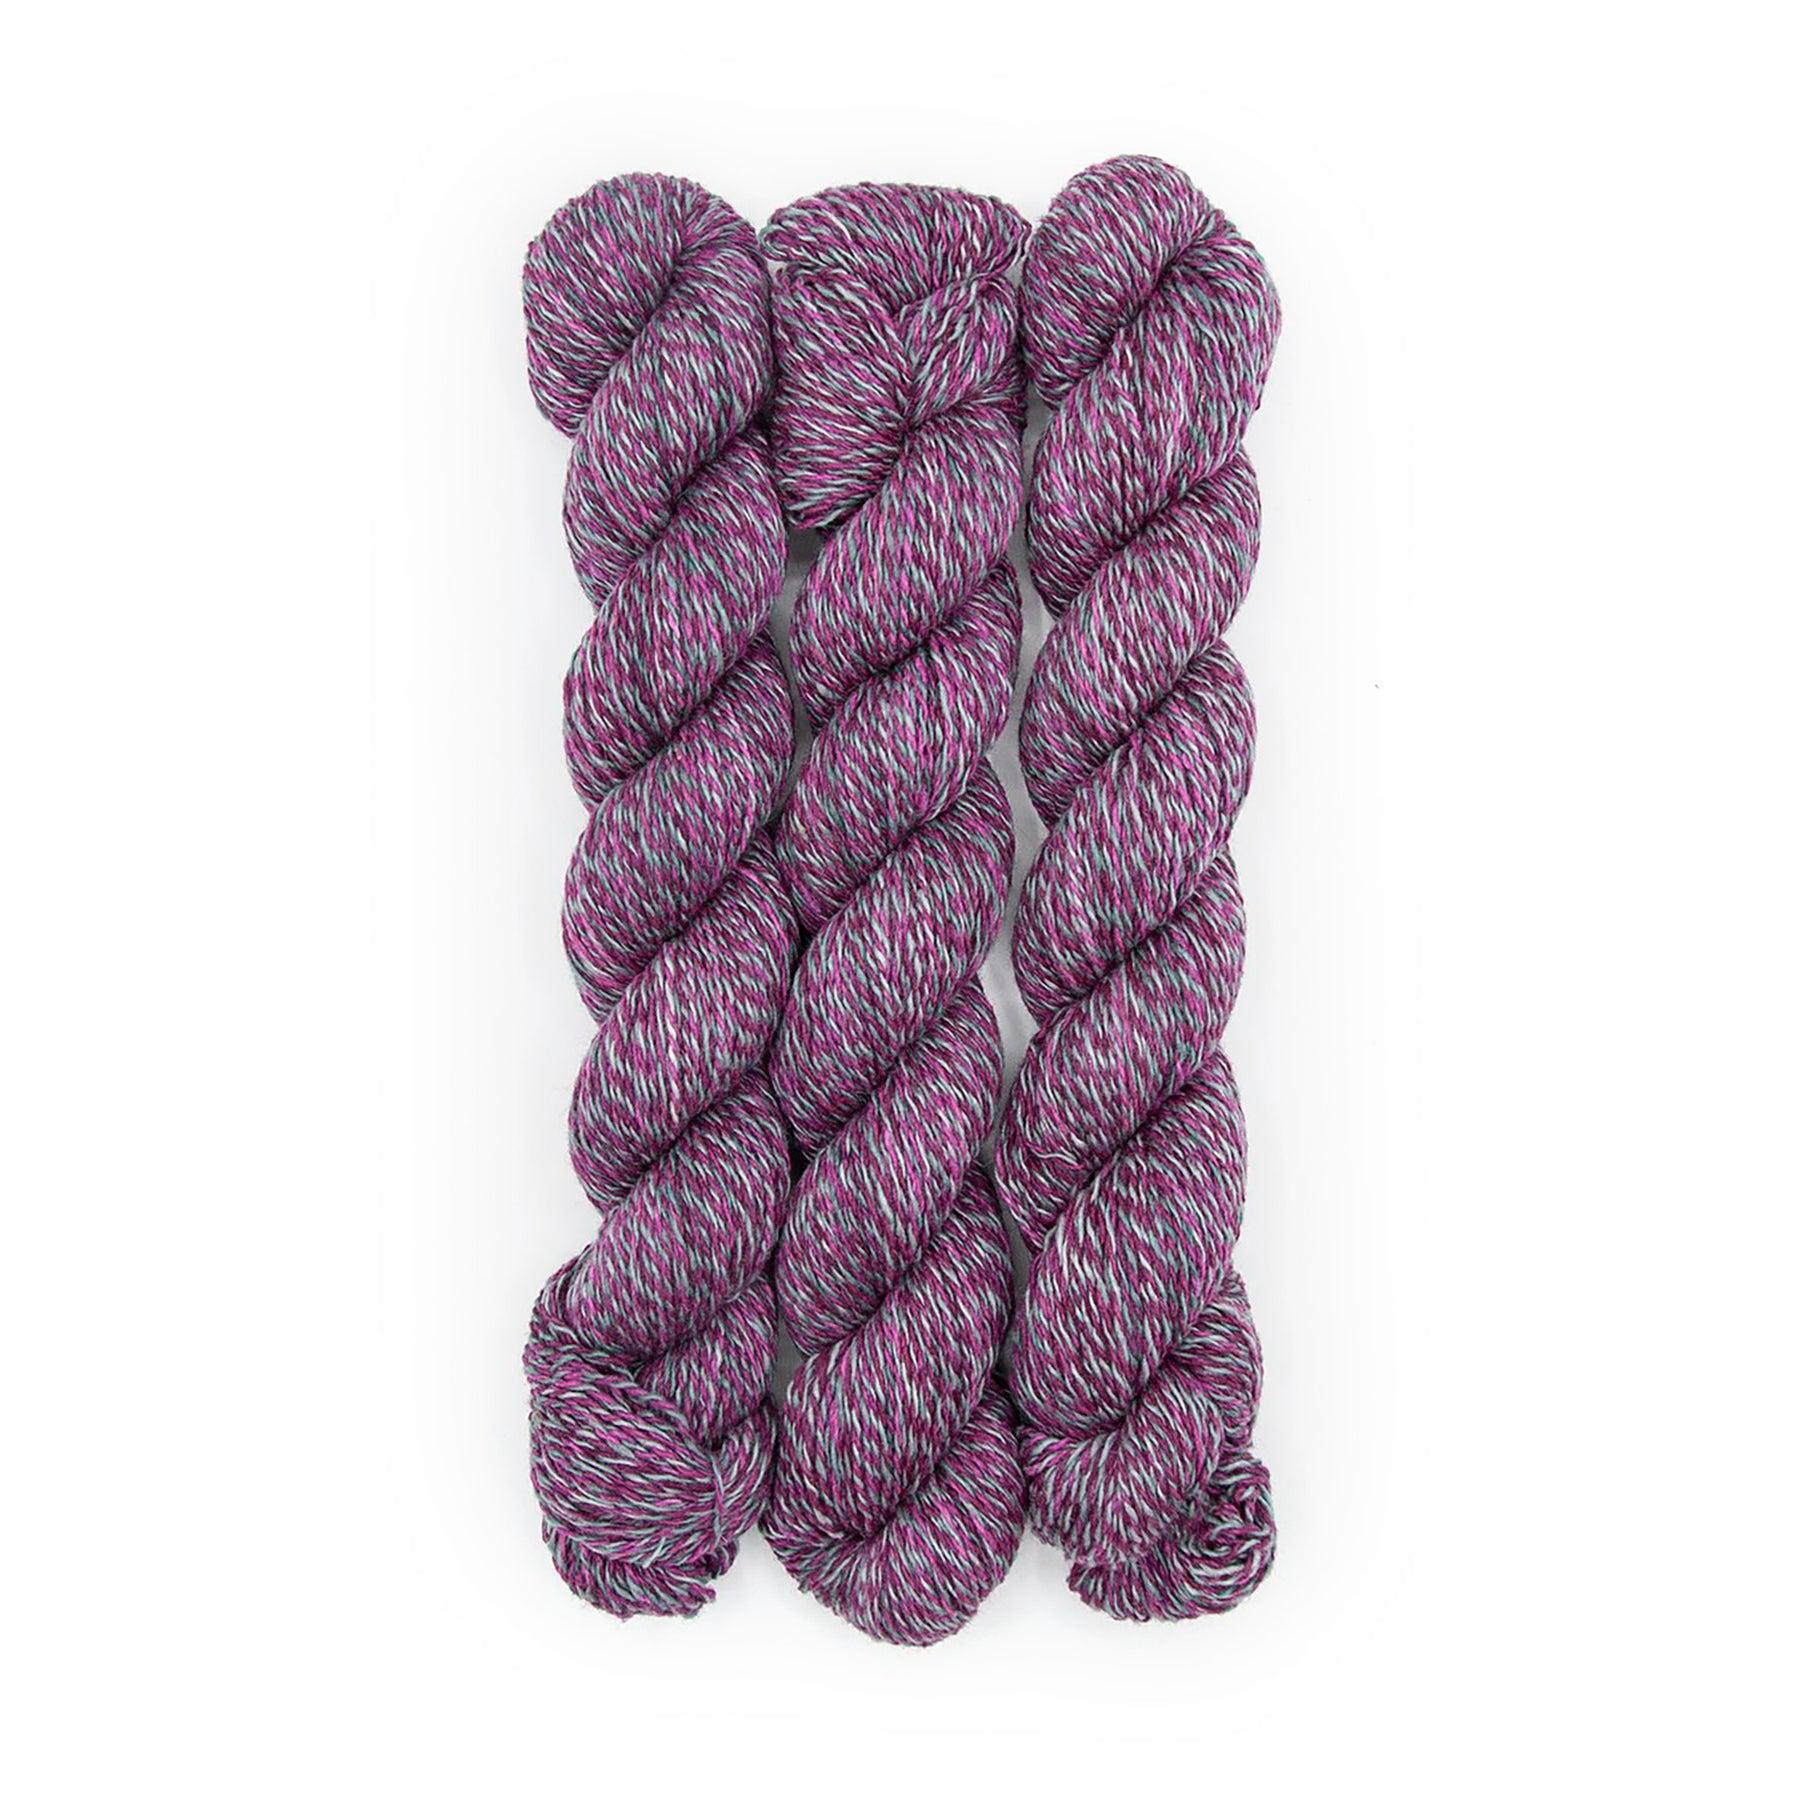 Plied Yarn North Ave Eubie Blake a marled yarn with grey, magenta and bright pink colors.